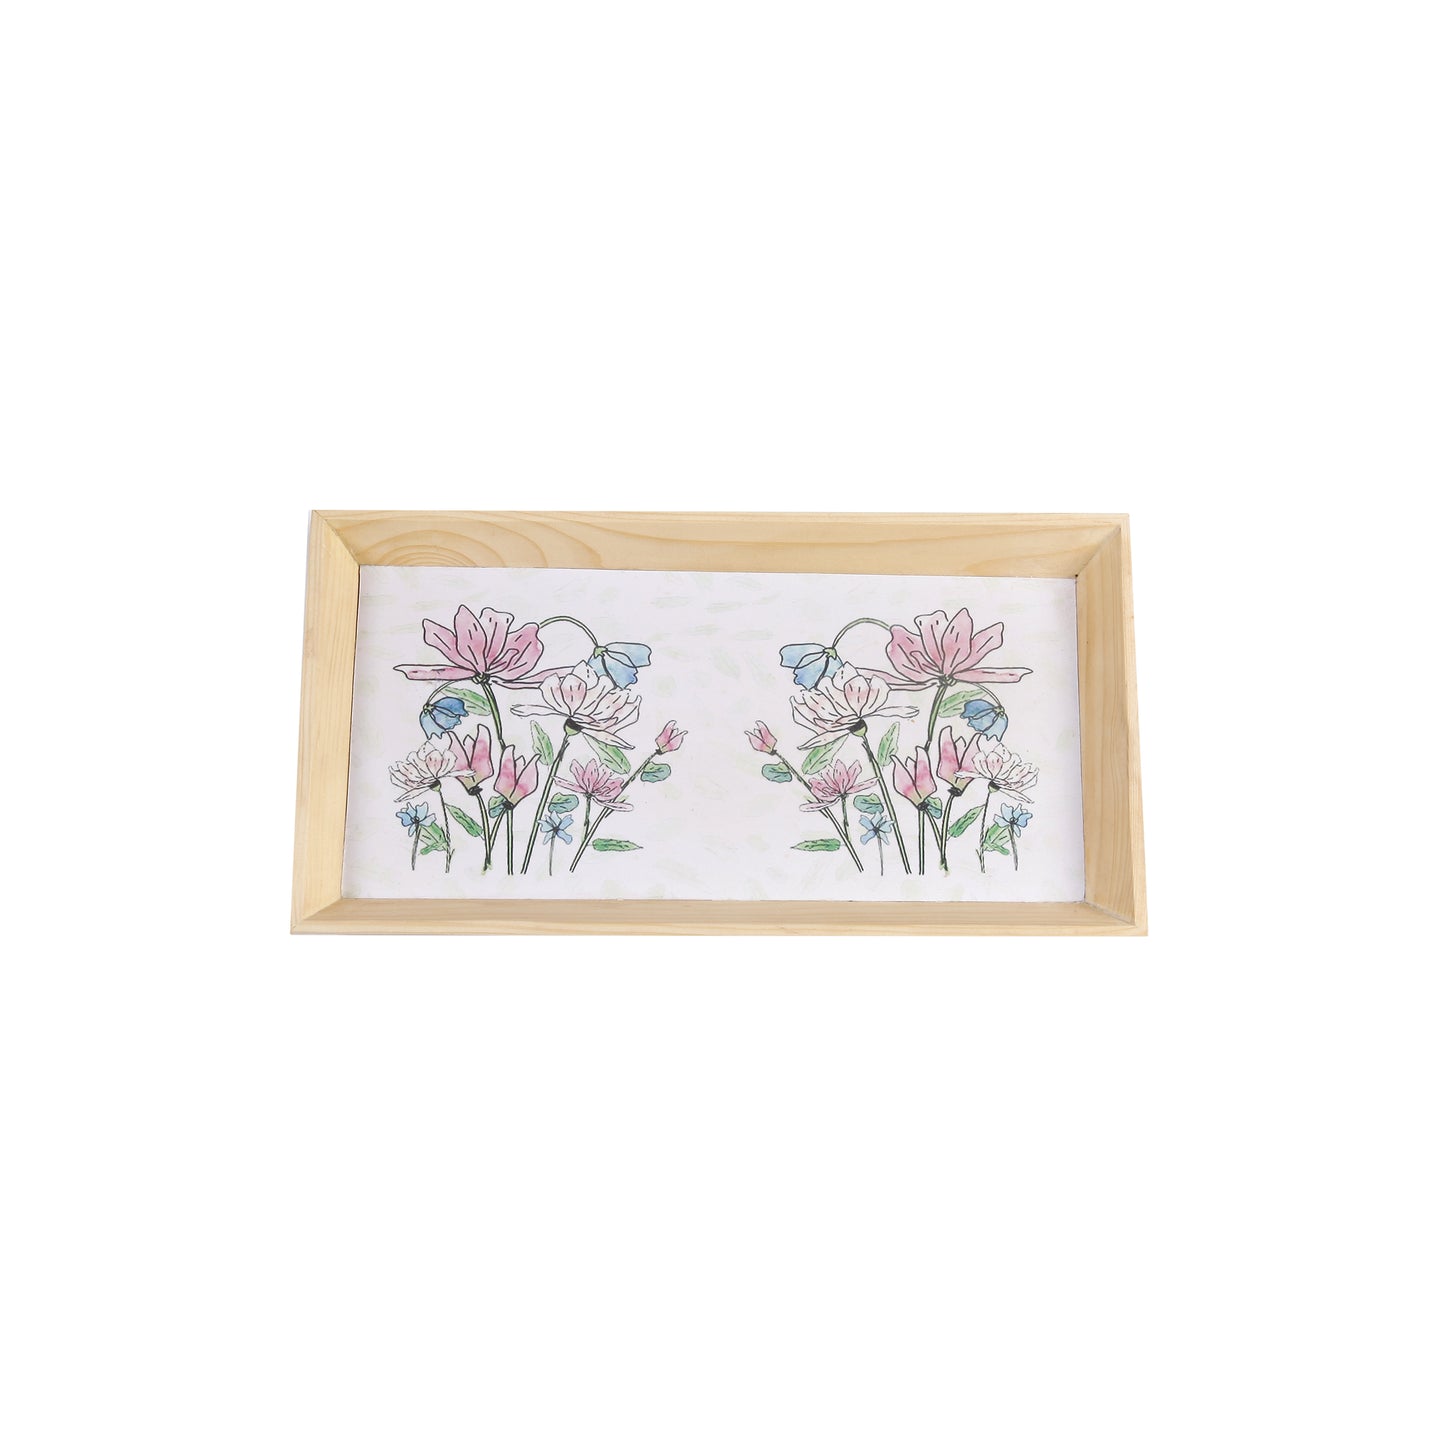 A Tiny Mistake Daisies Rectangle Wooden Serving Tray, 35 x 20 x 2 cm